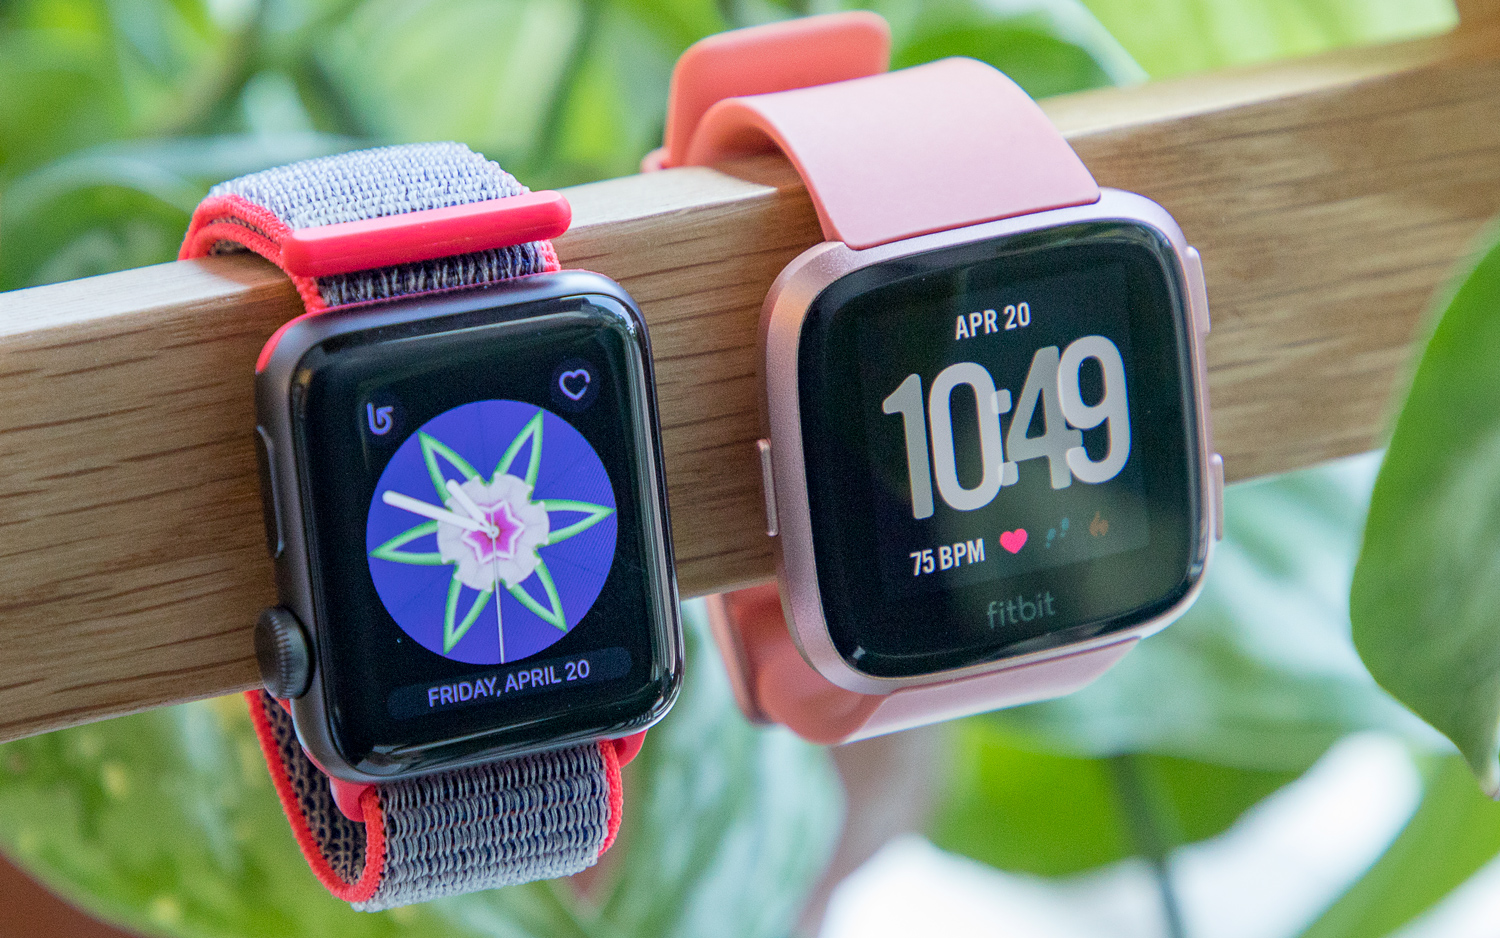 apple bought fitbit